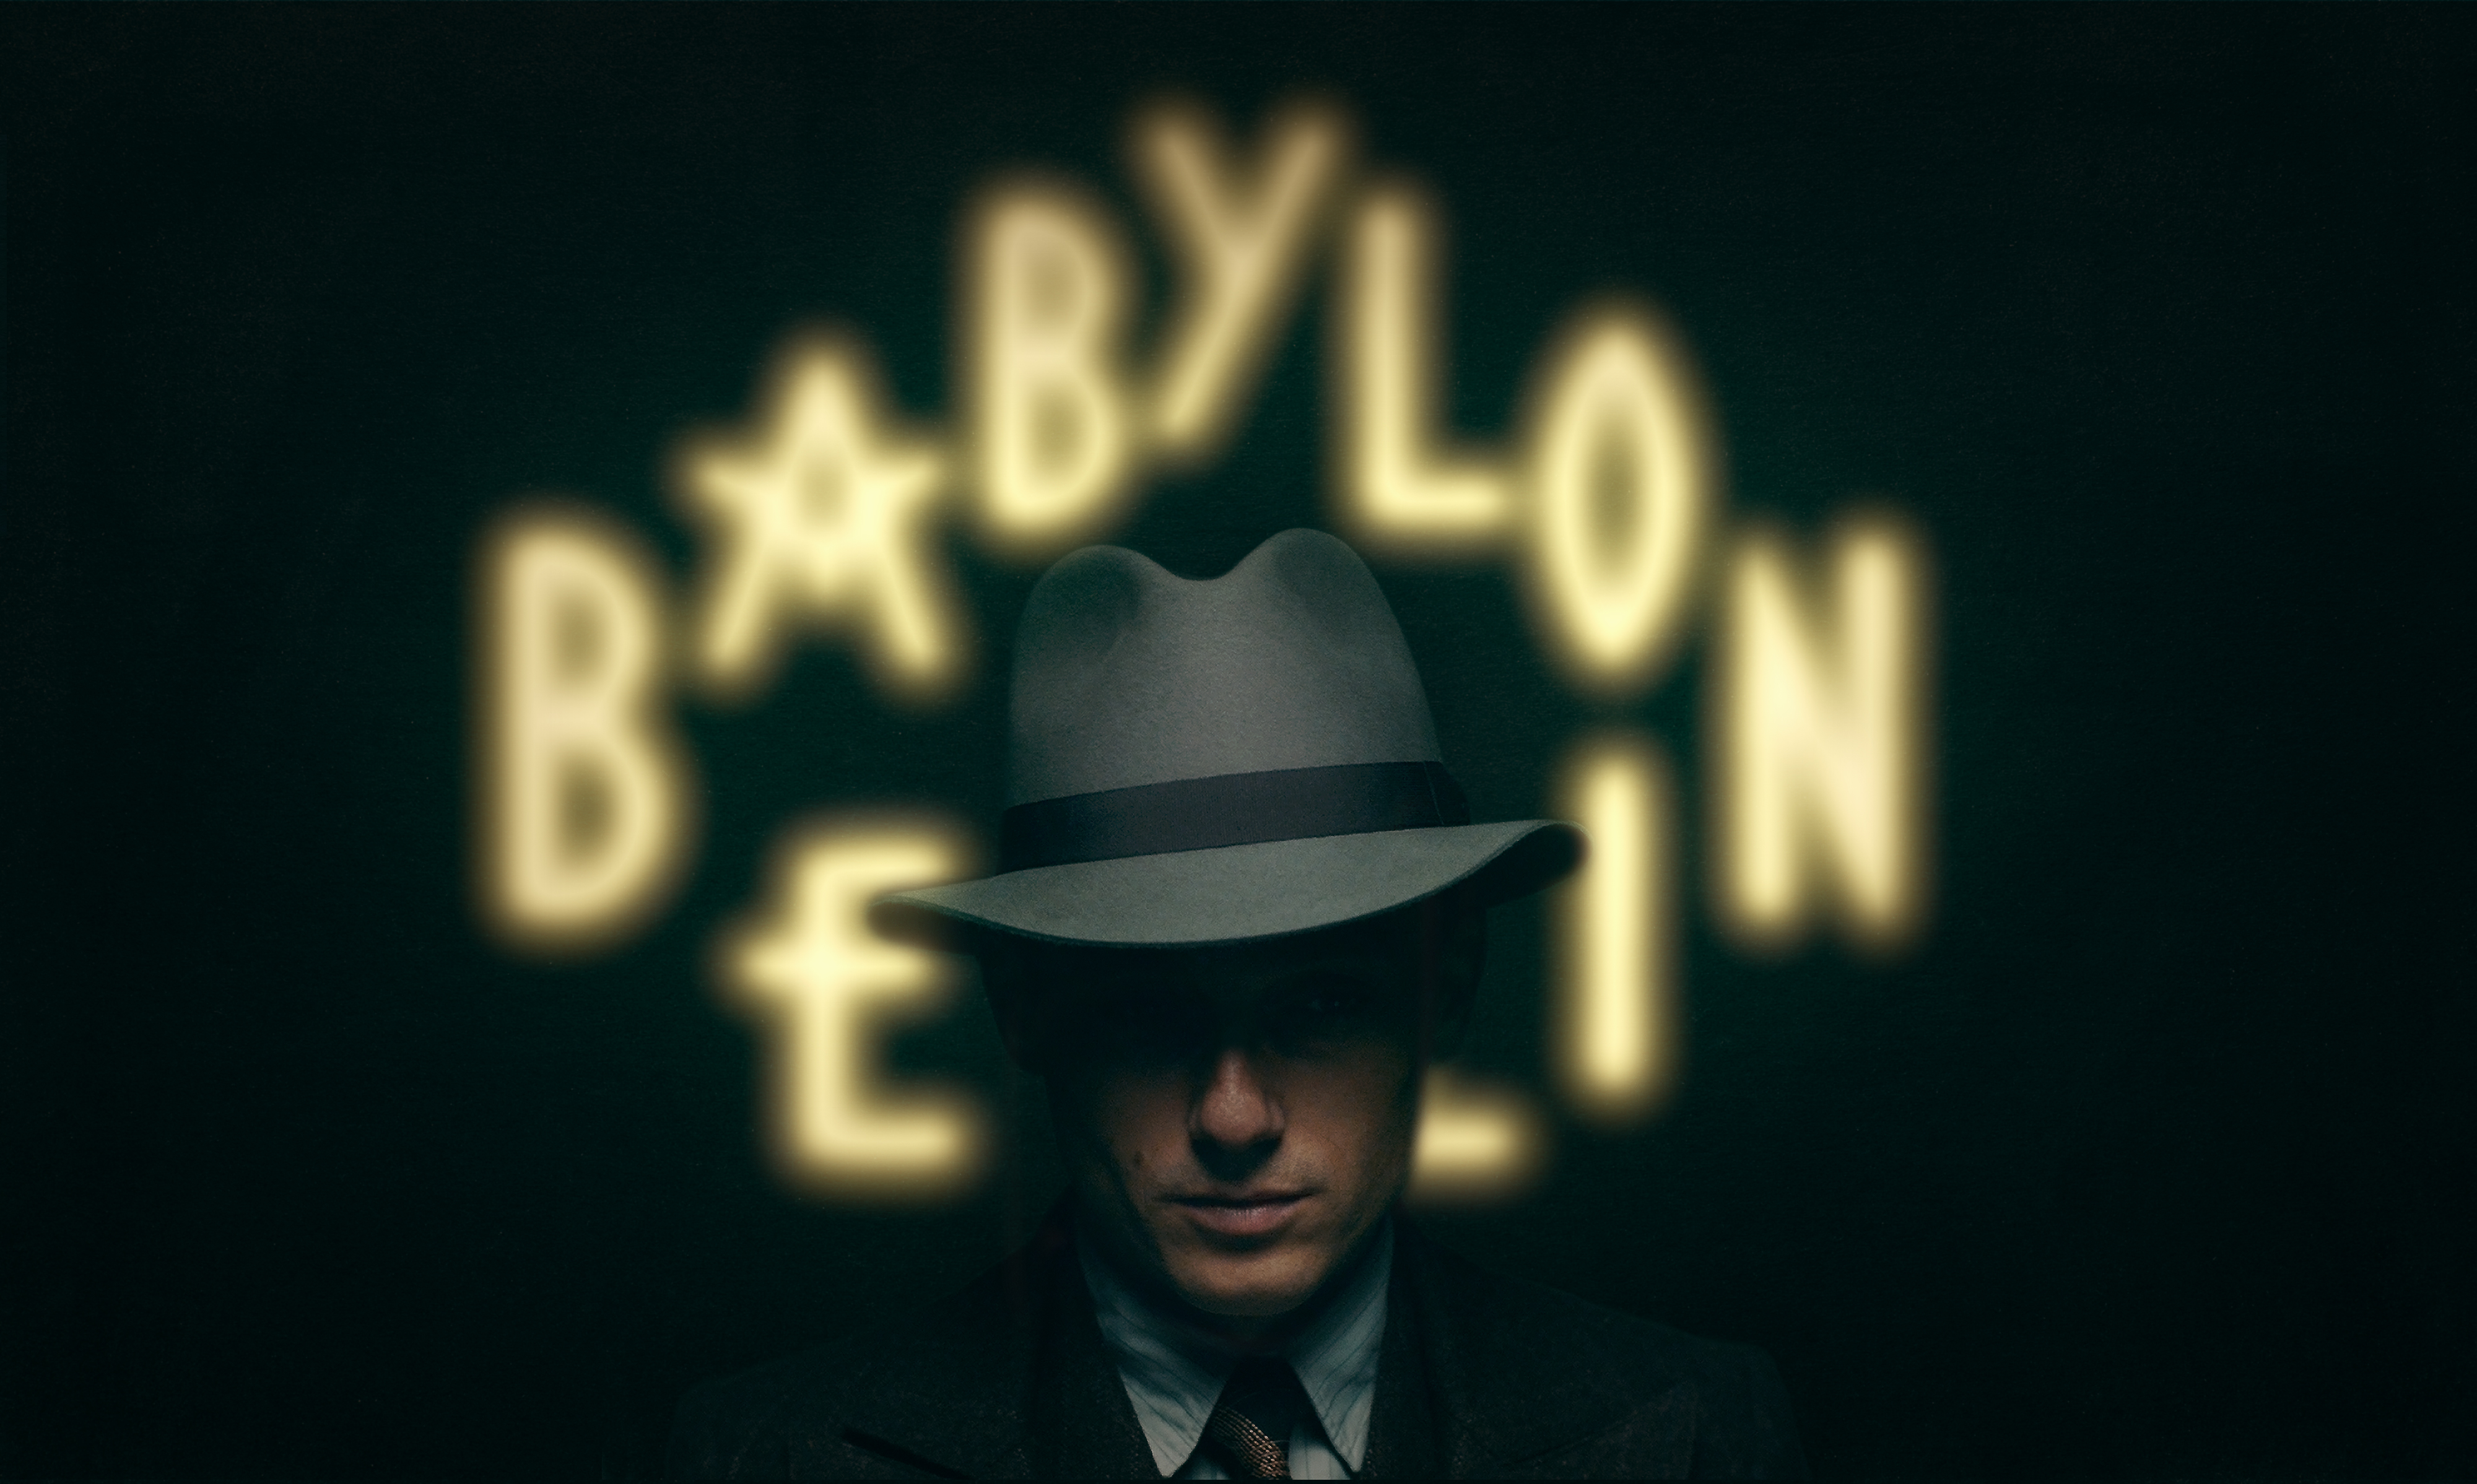 Directed by Tom Tykwer, Babylon Berlin is the most expensive television drama series in Germany.